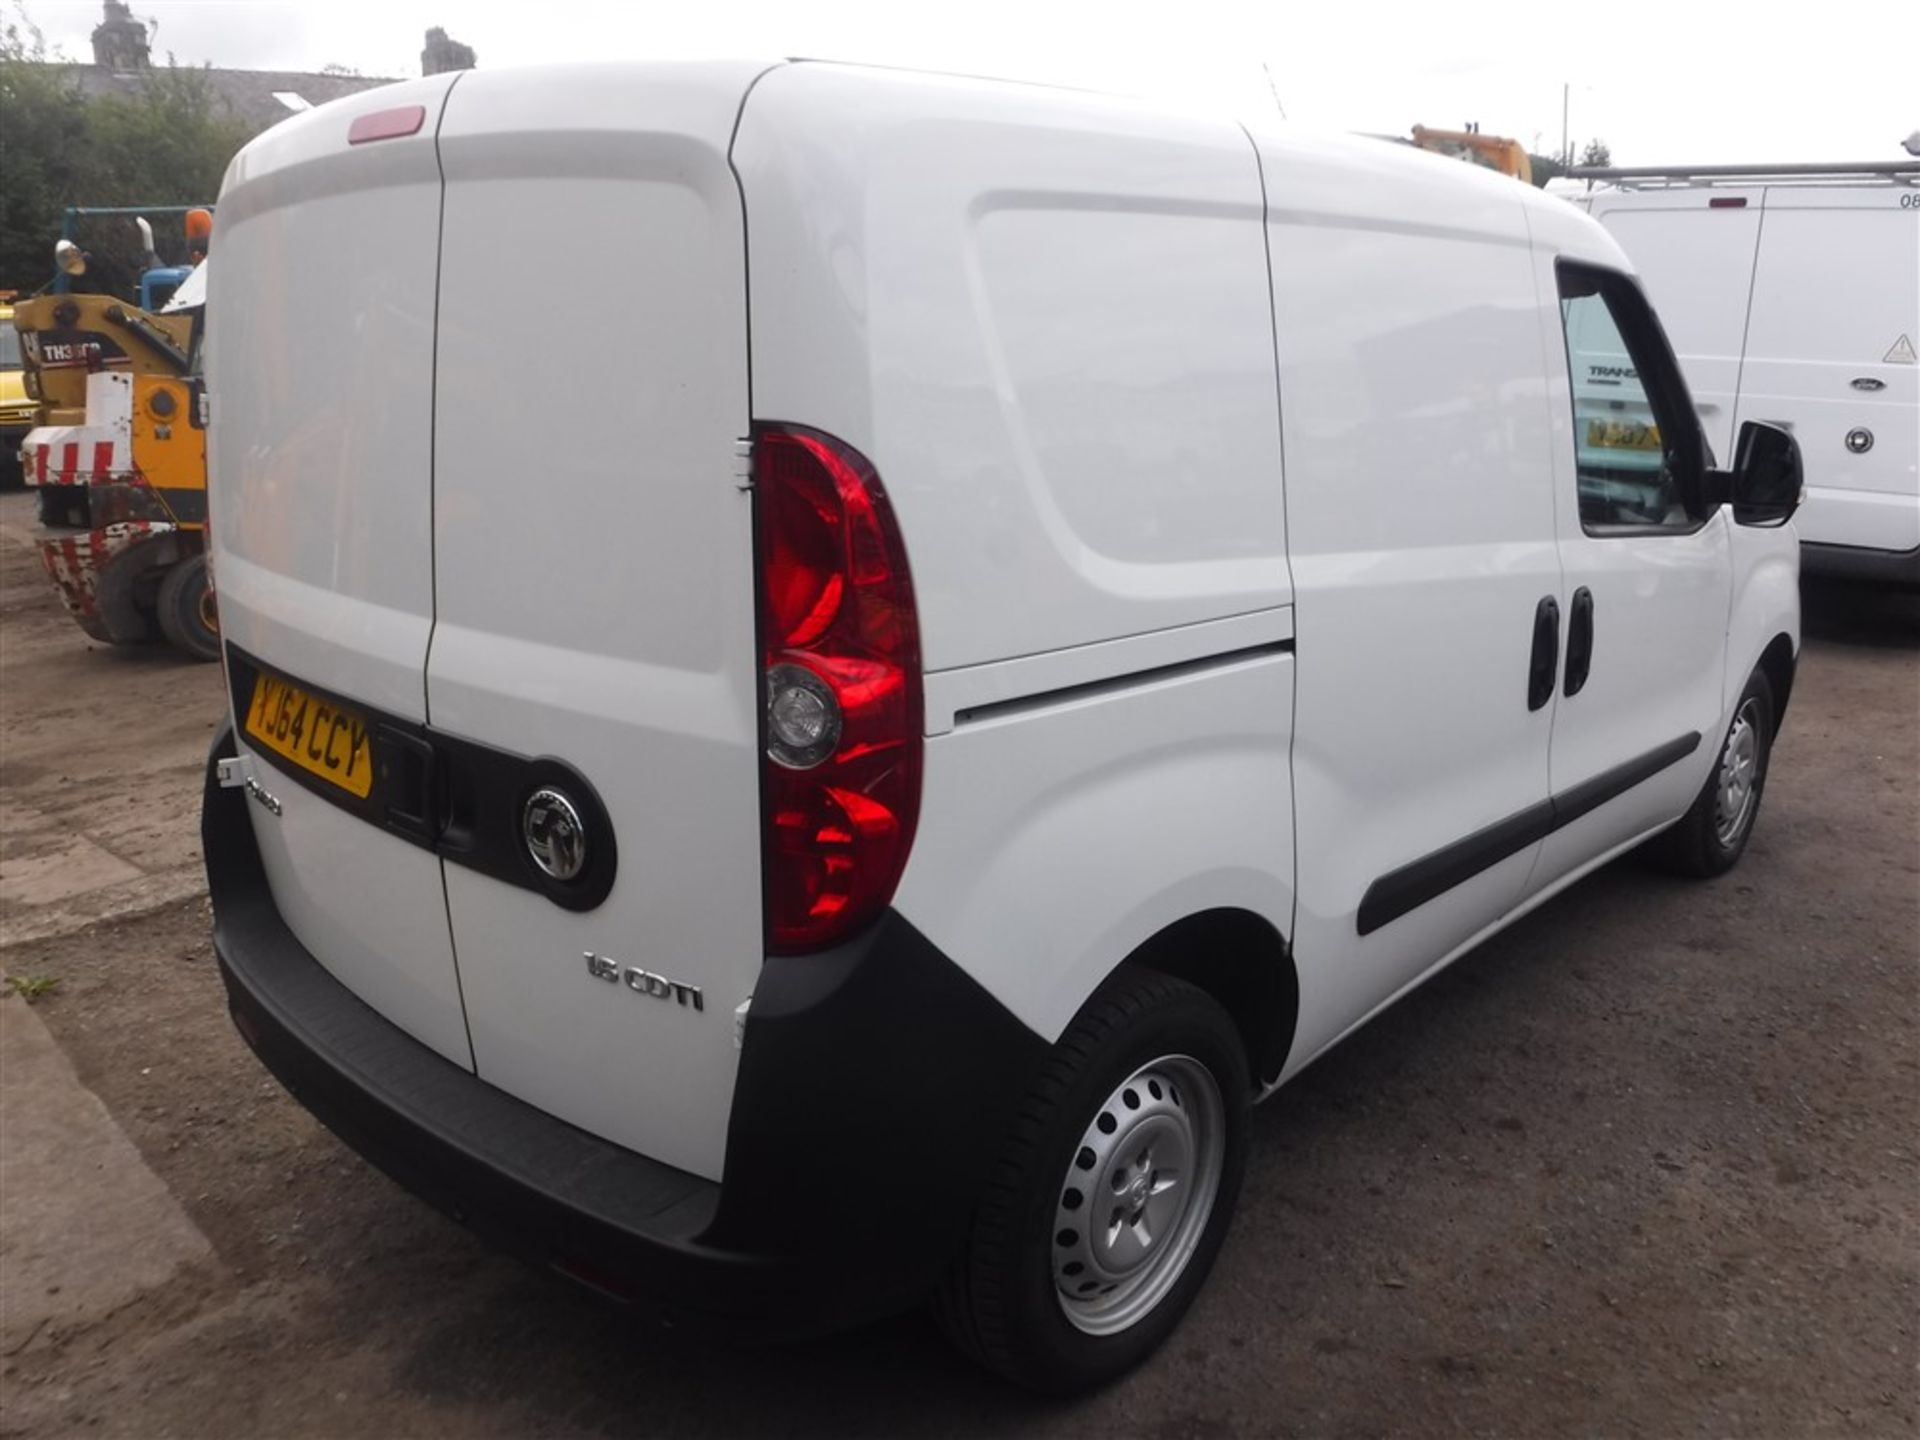 64 reg VAUXHALL COMBO 2000 L1H1 CDTI S/S, 1ST REG 01/15, 38915M WARRANTED, V5 HERE, 1 OWNER FROM NEW - Image 4 of 5